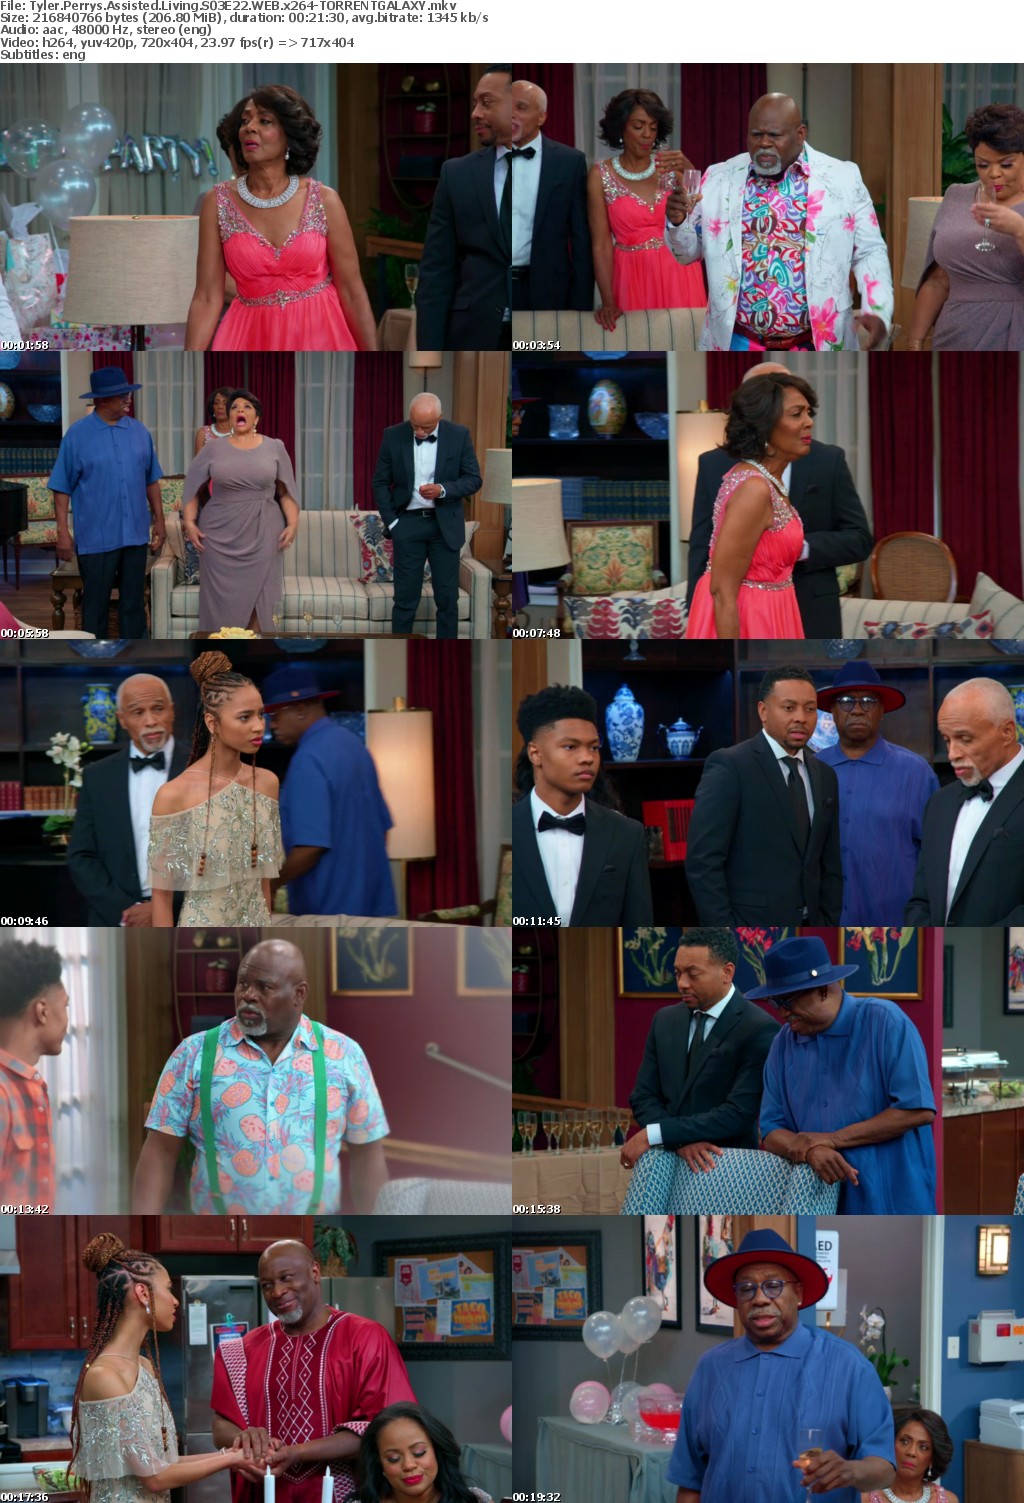 Tyler Perrys Assisted Living S03E22 WEB x264-GALAXY